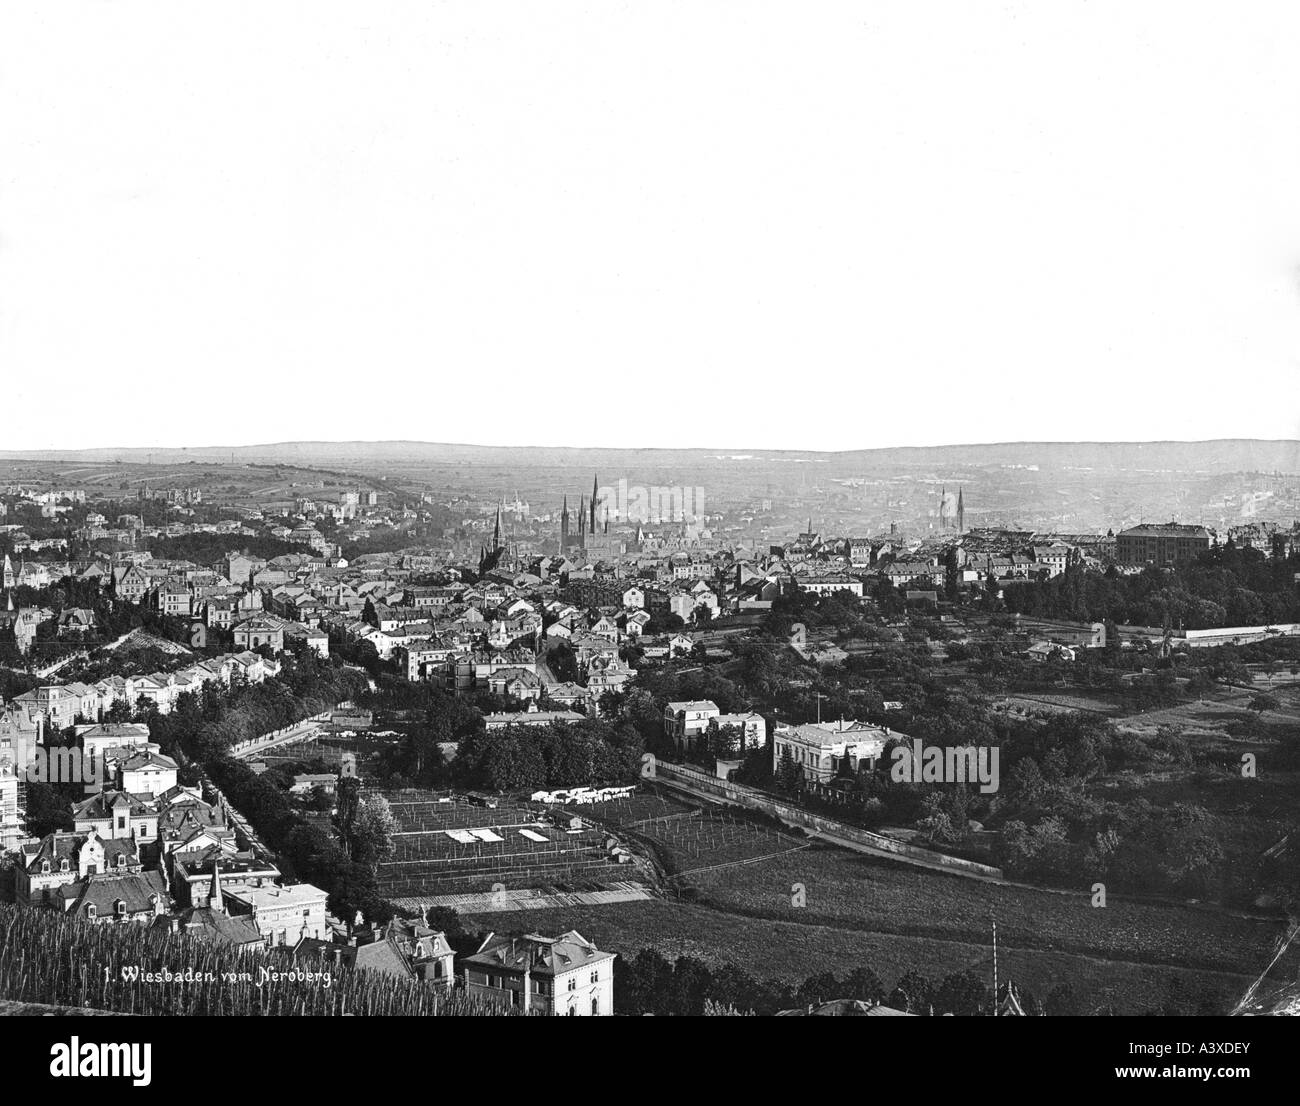 geography / travel, Germany, Wiesbaden, city views / cityscapes, view from Neroberg mountain, circa 1910, Stock Photo